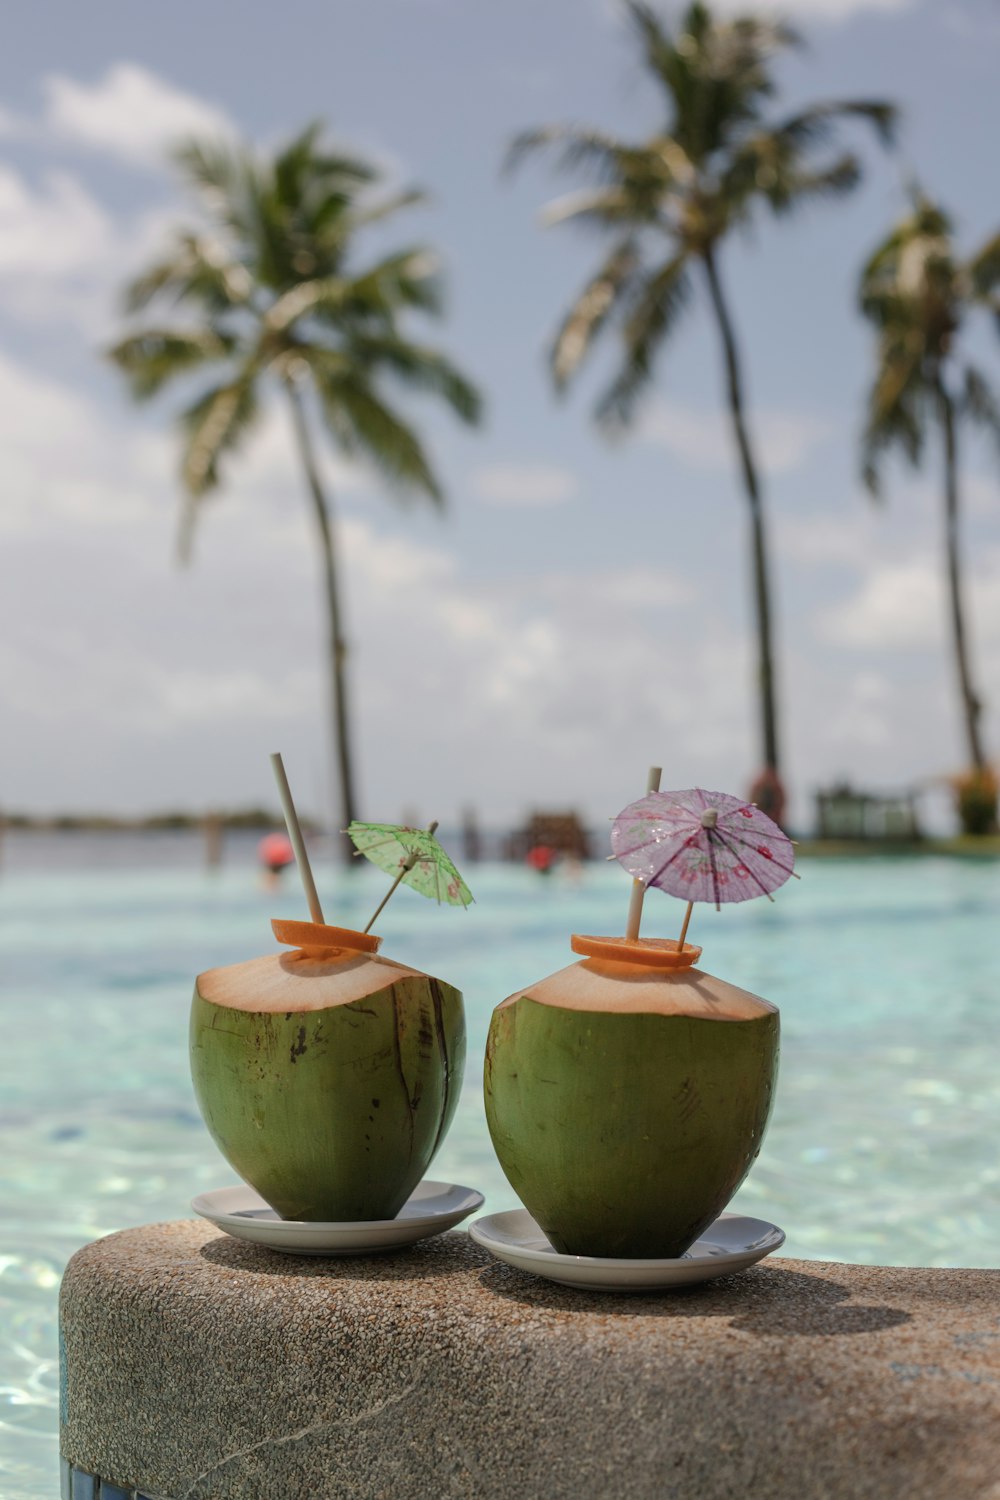 a couple of coconuts with umbrellas on a beach